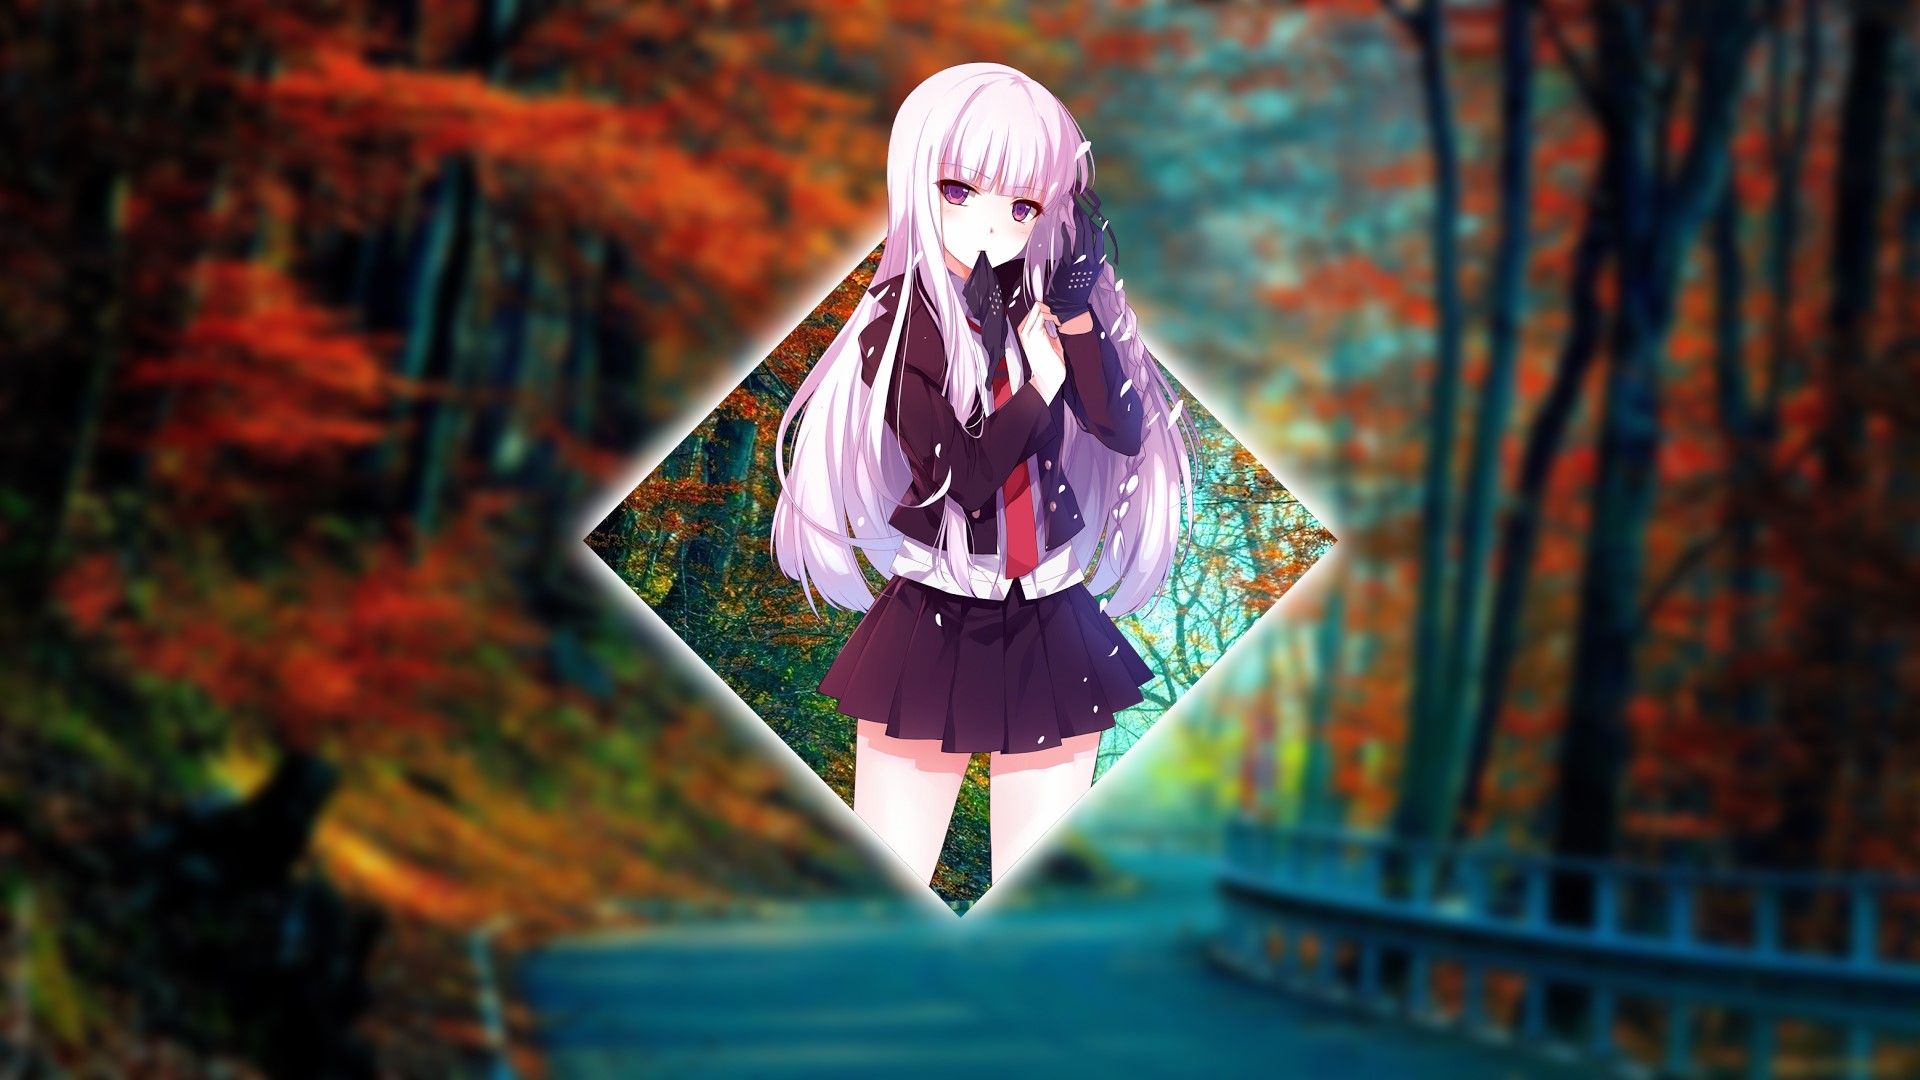 Anime girl in the forest - Danganronpa